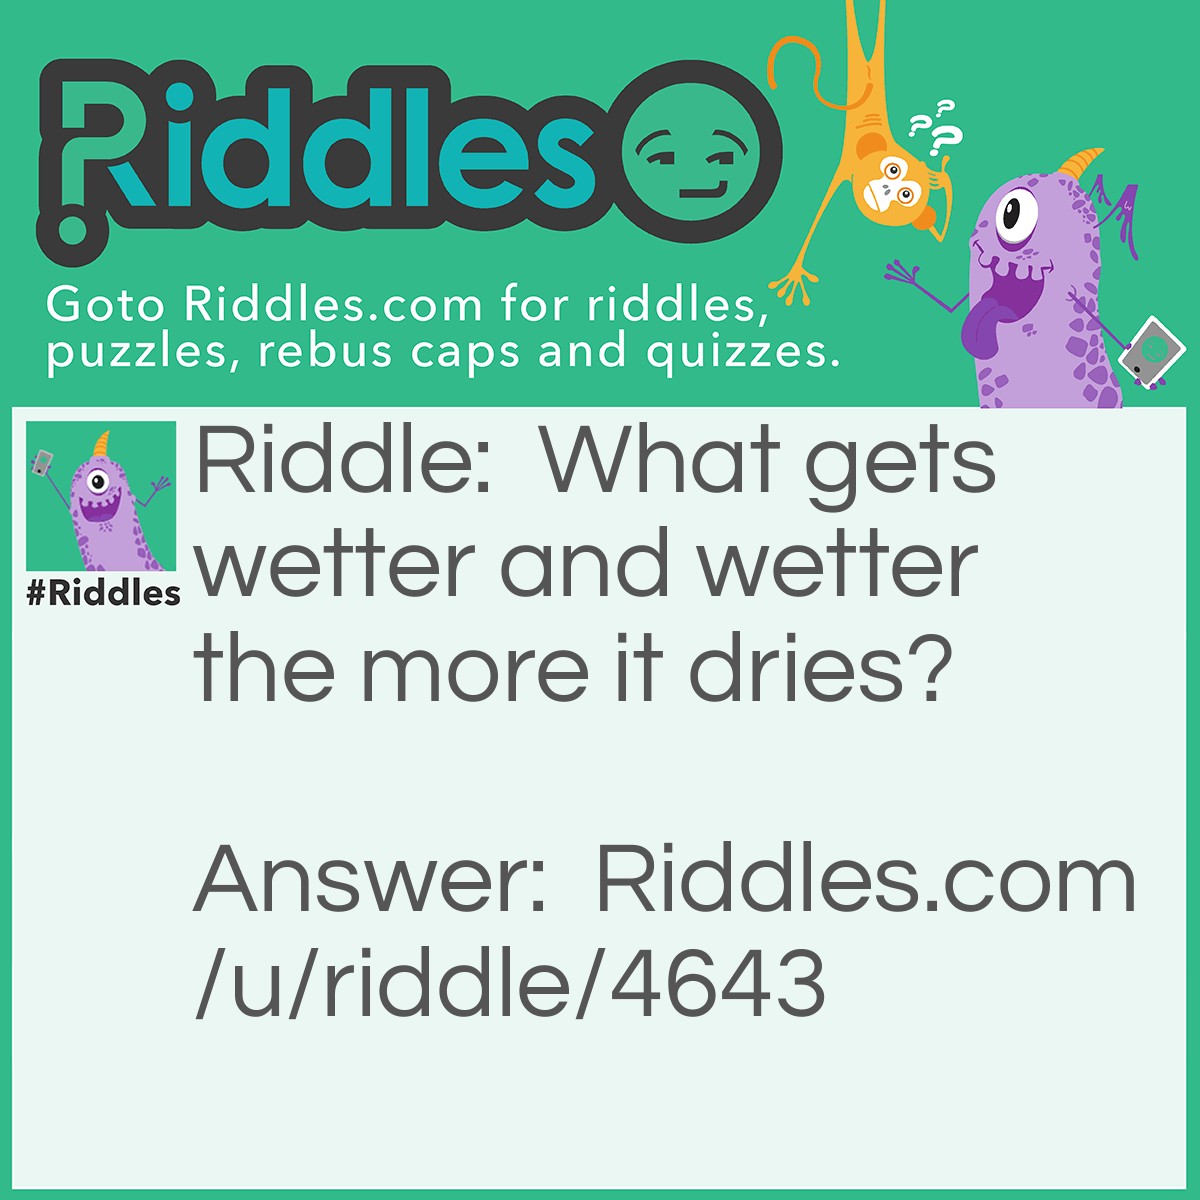 Riddle: What gets wetter and wetter the more it dries? Answer: A towel.